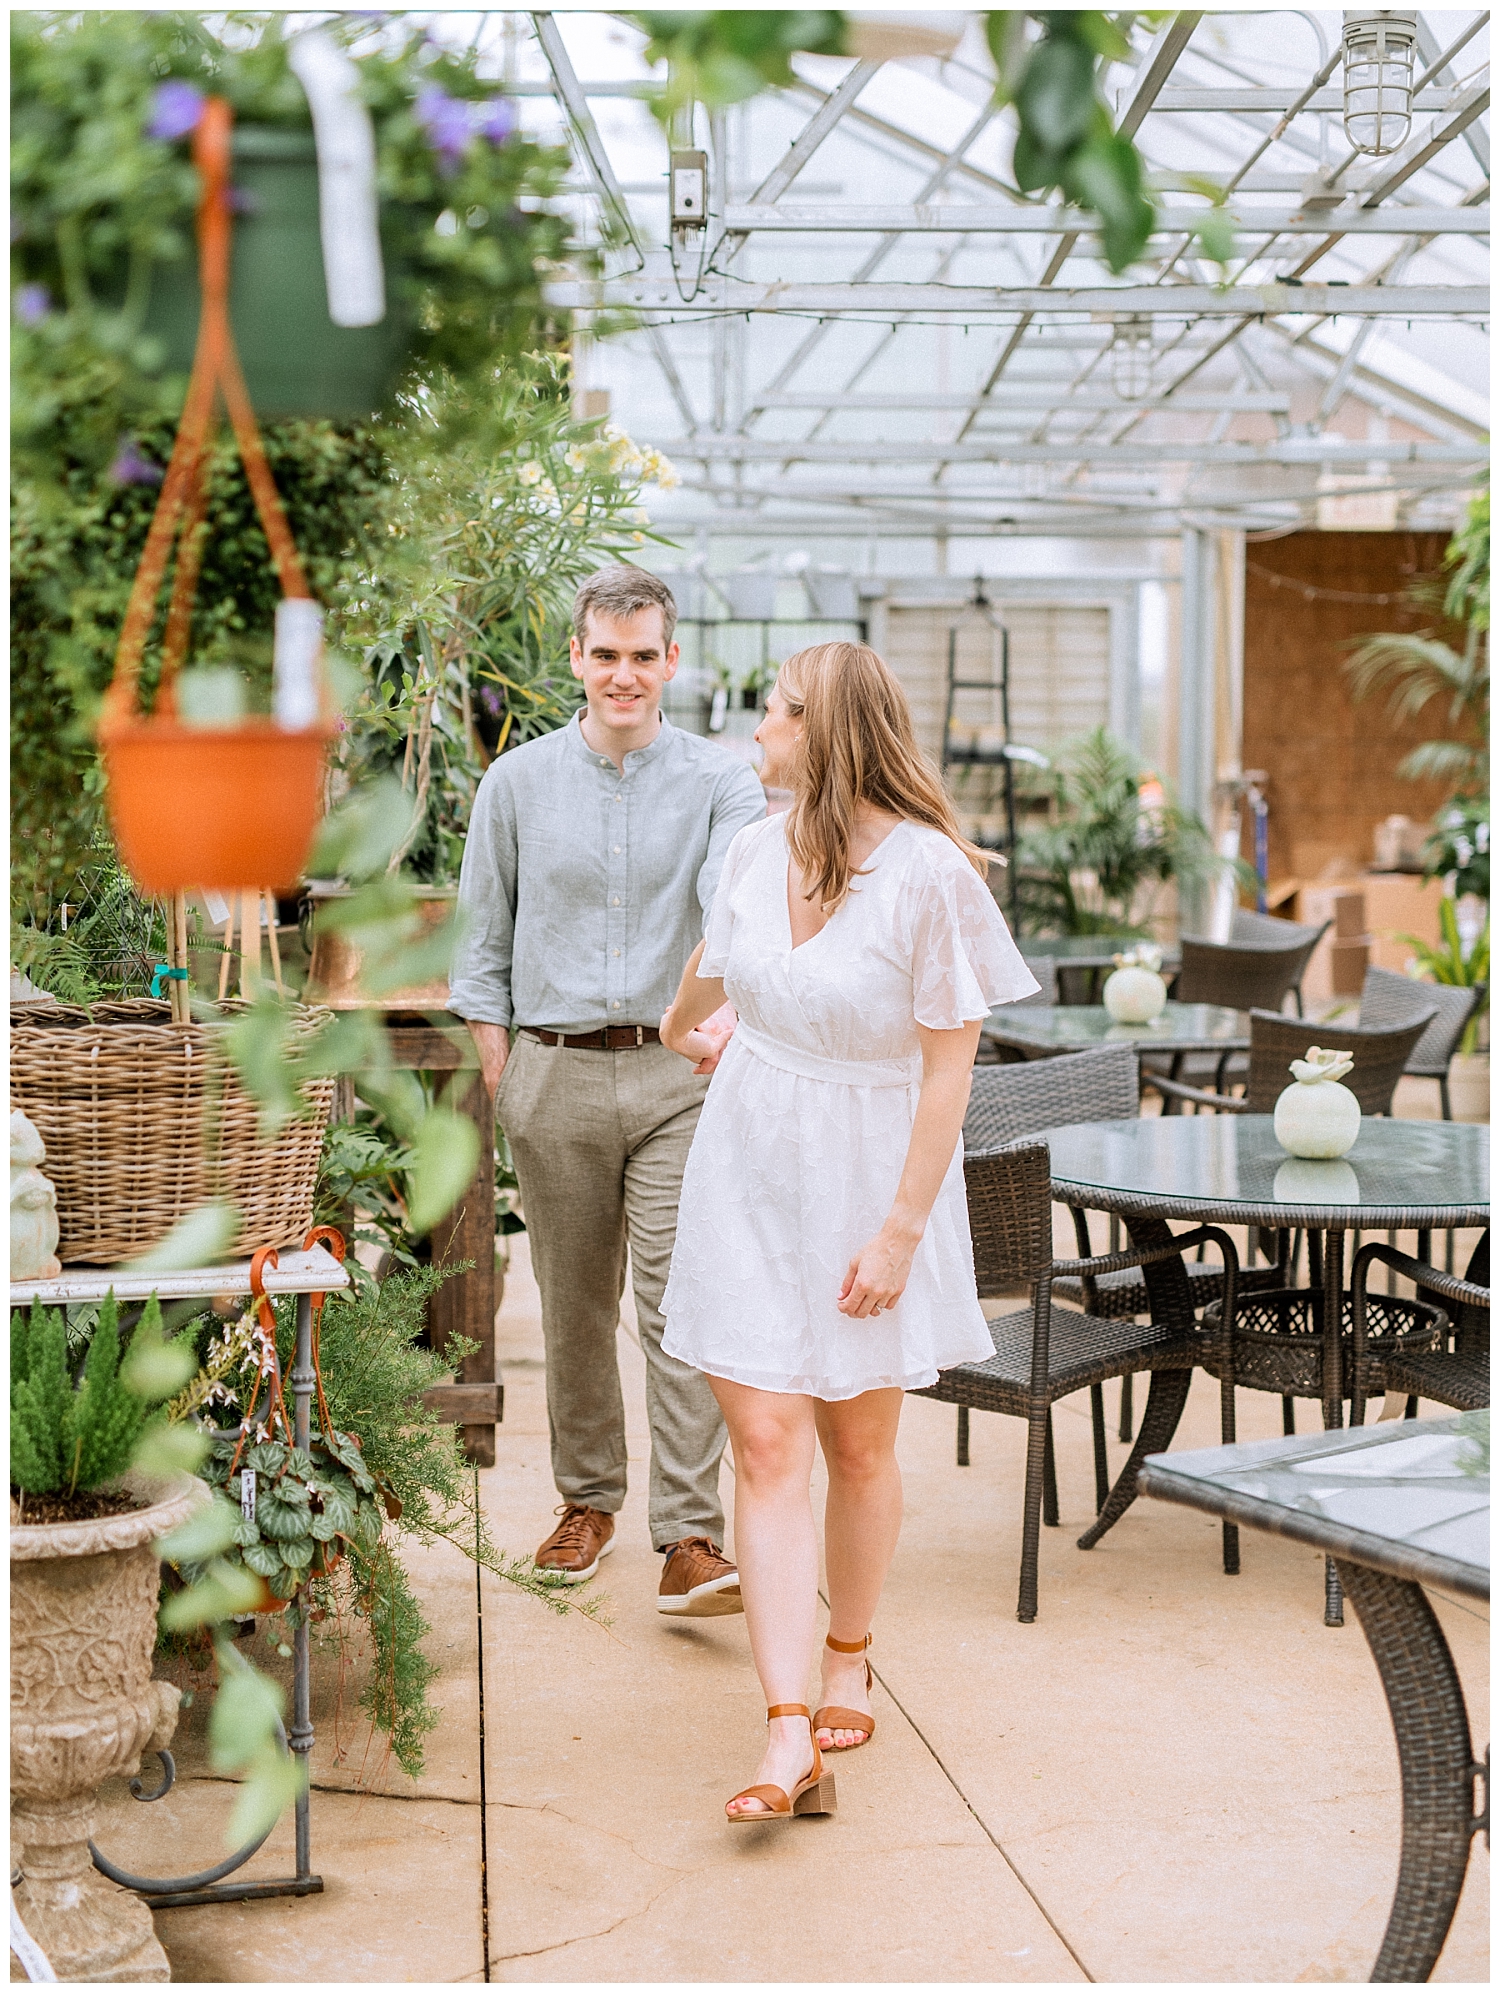 Engaged couple portraits at Market at Grelen in Somerset, Virginia